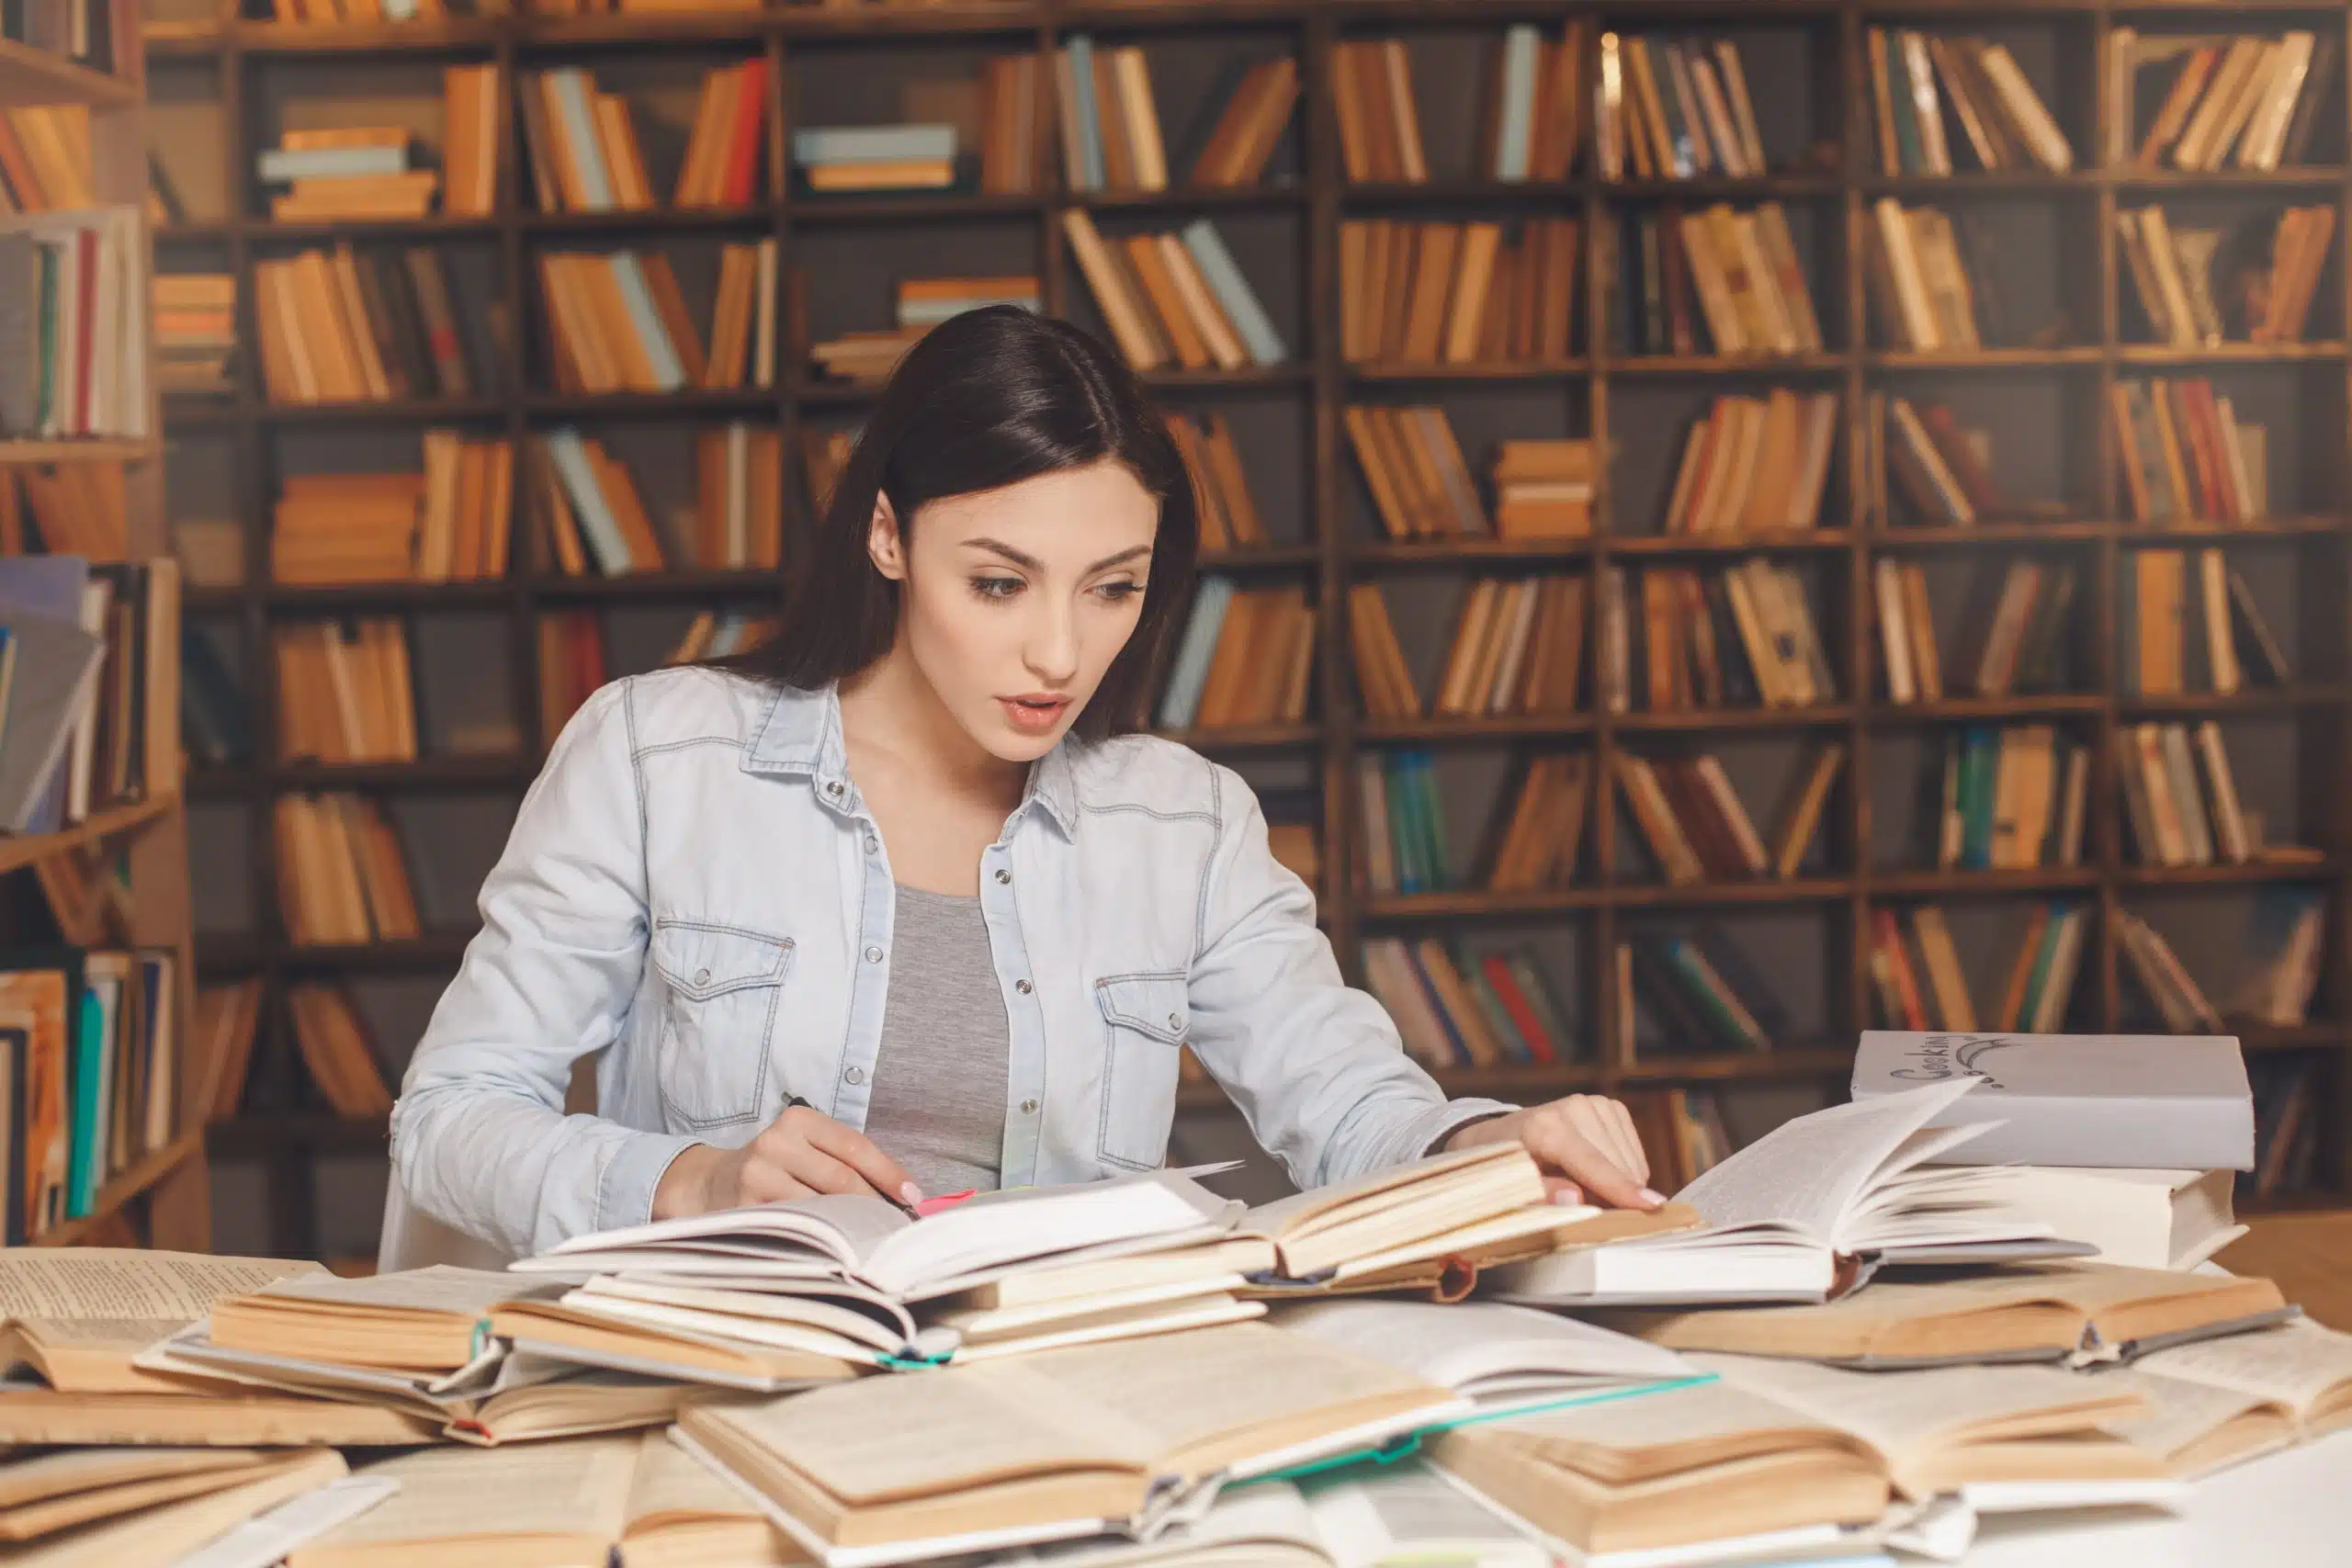 Young woman study in the library alone, books scattered on the table